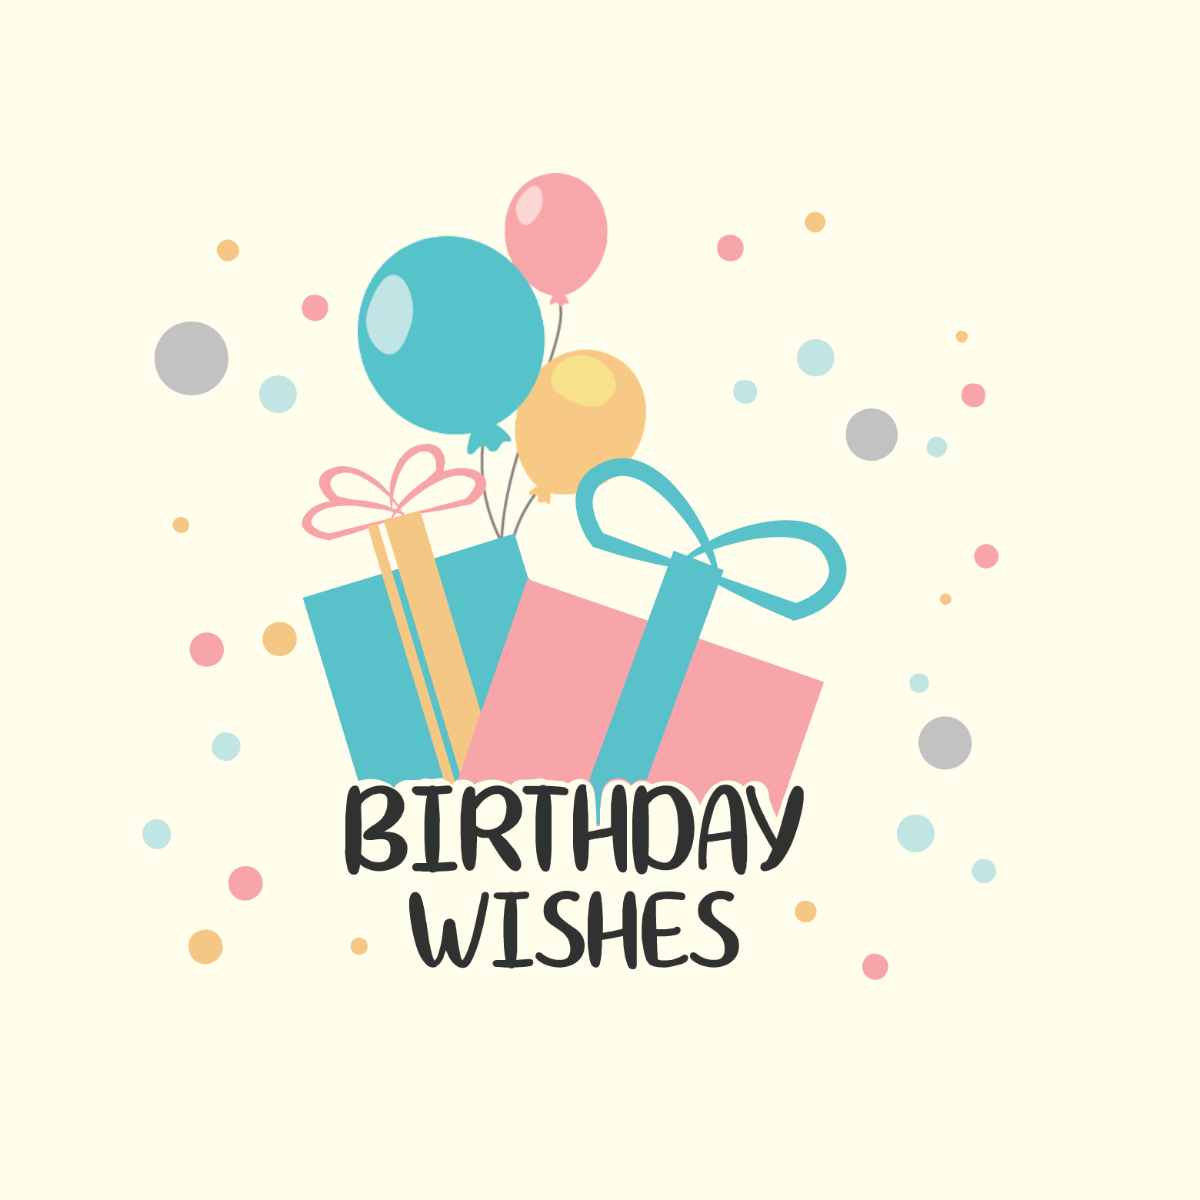 Happy Birthday Wishes Vector Template